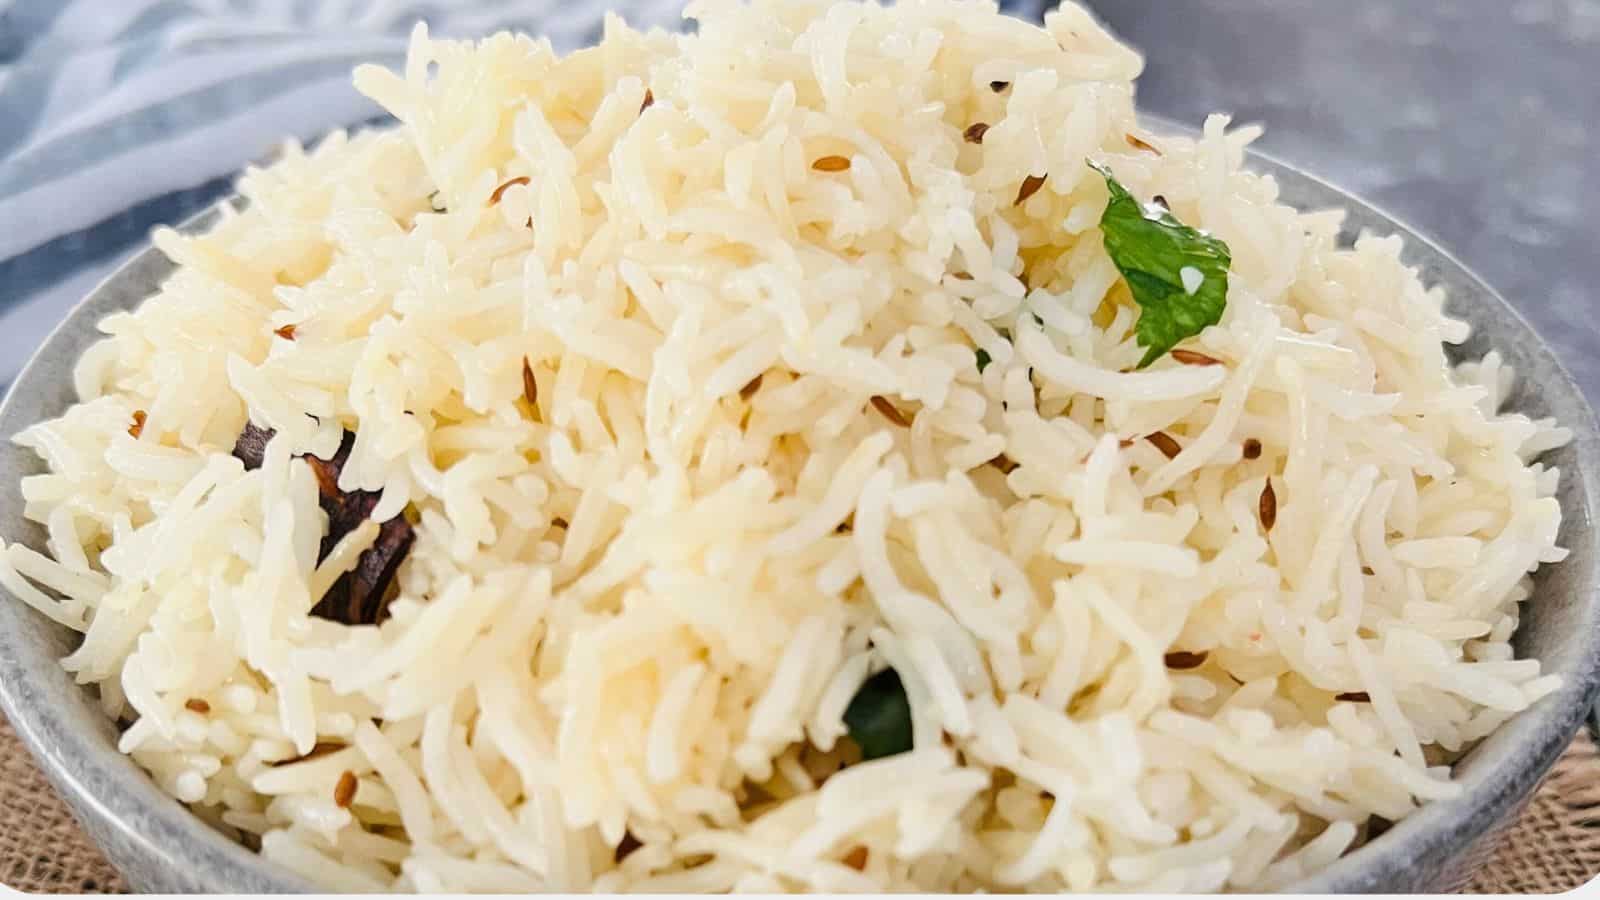 <p>Ready to hit the easy button for simple, cumin-scented jeera rice? This humble Instant Pot preparation is the perfect fluffy, aromatic base for curries and chillin'.<br><strong>Get the Recipe: </strong><a href="https://easyindiancookbook.com/instant-pot-jeera-rice/?utm_source=msn&utm_medium=page&utm_campaign=msn">Instant Pot Jeera Rice</a></p>